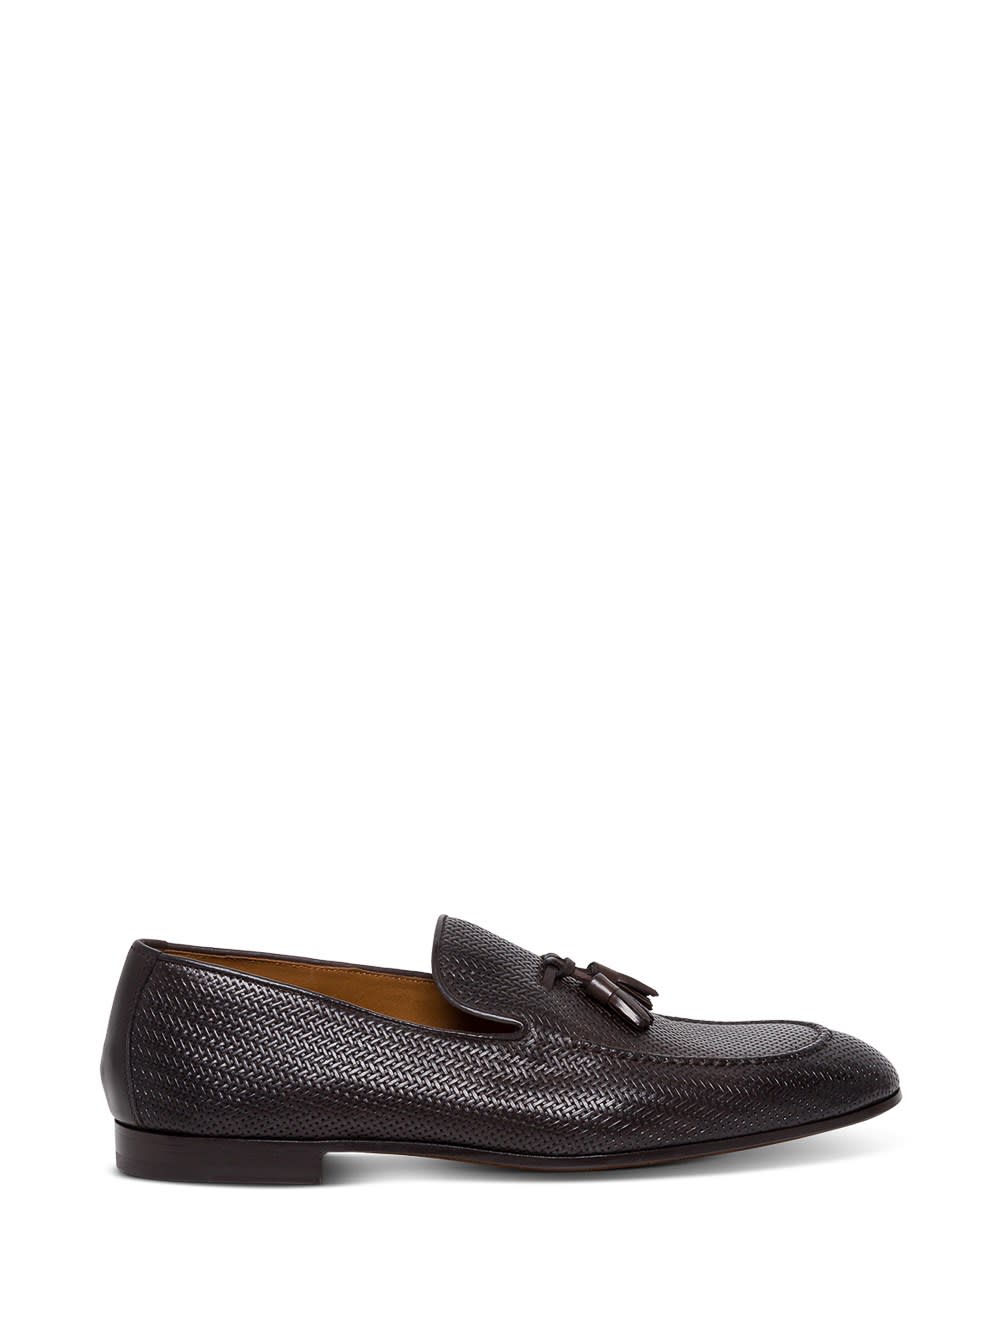 Doucals Loafers In Braided Leather With Tassels